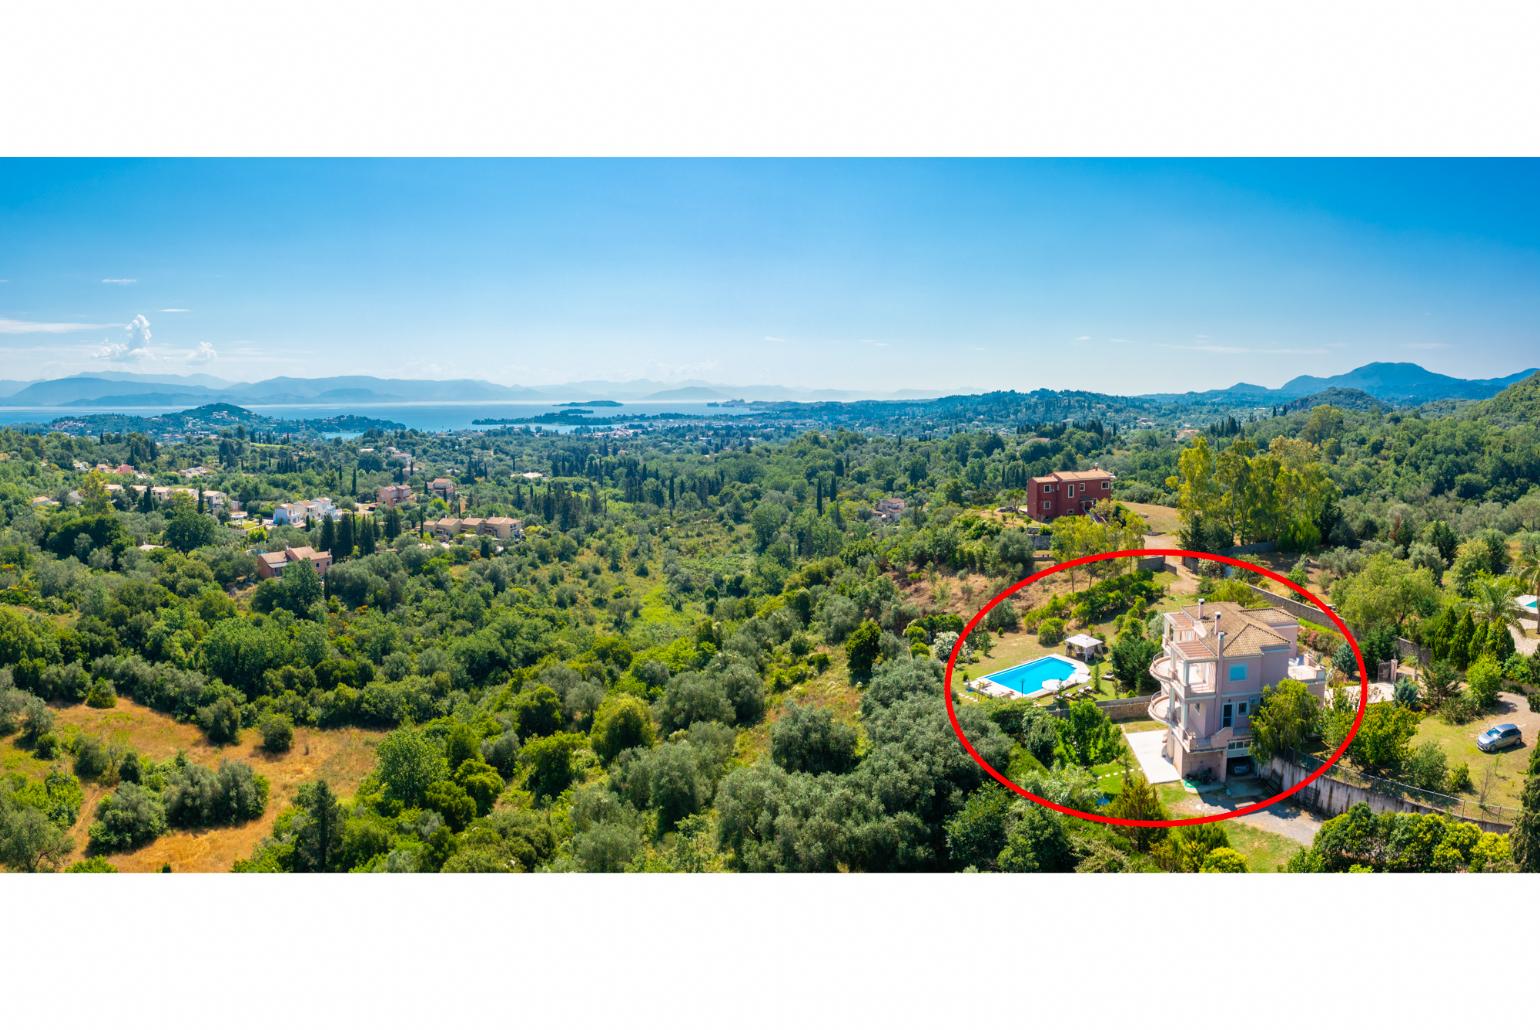 Aerial view showing location of Villa Denise